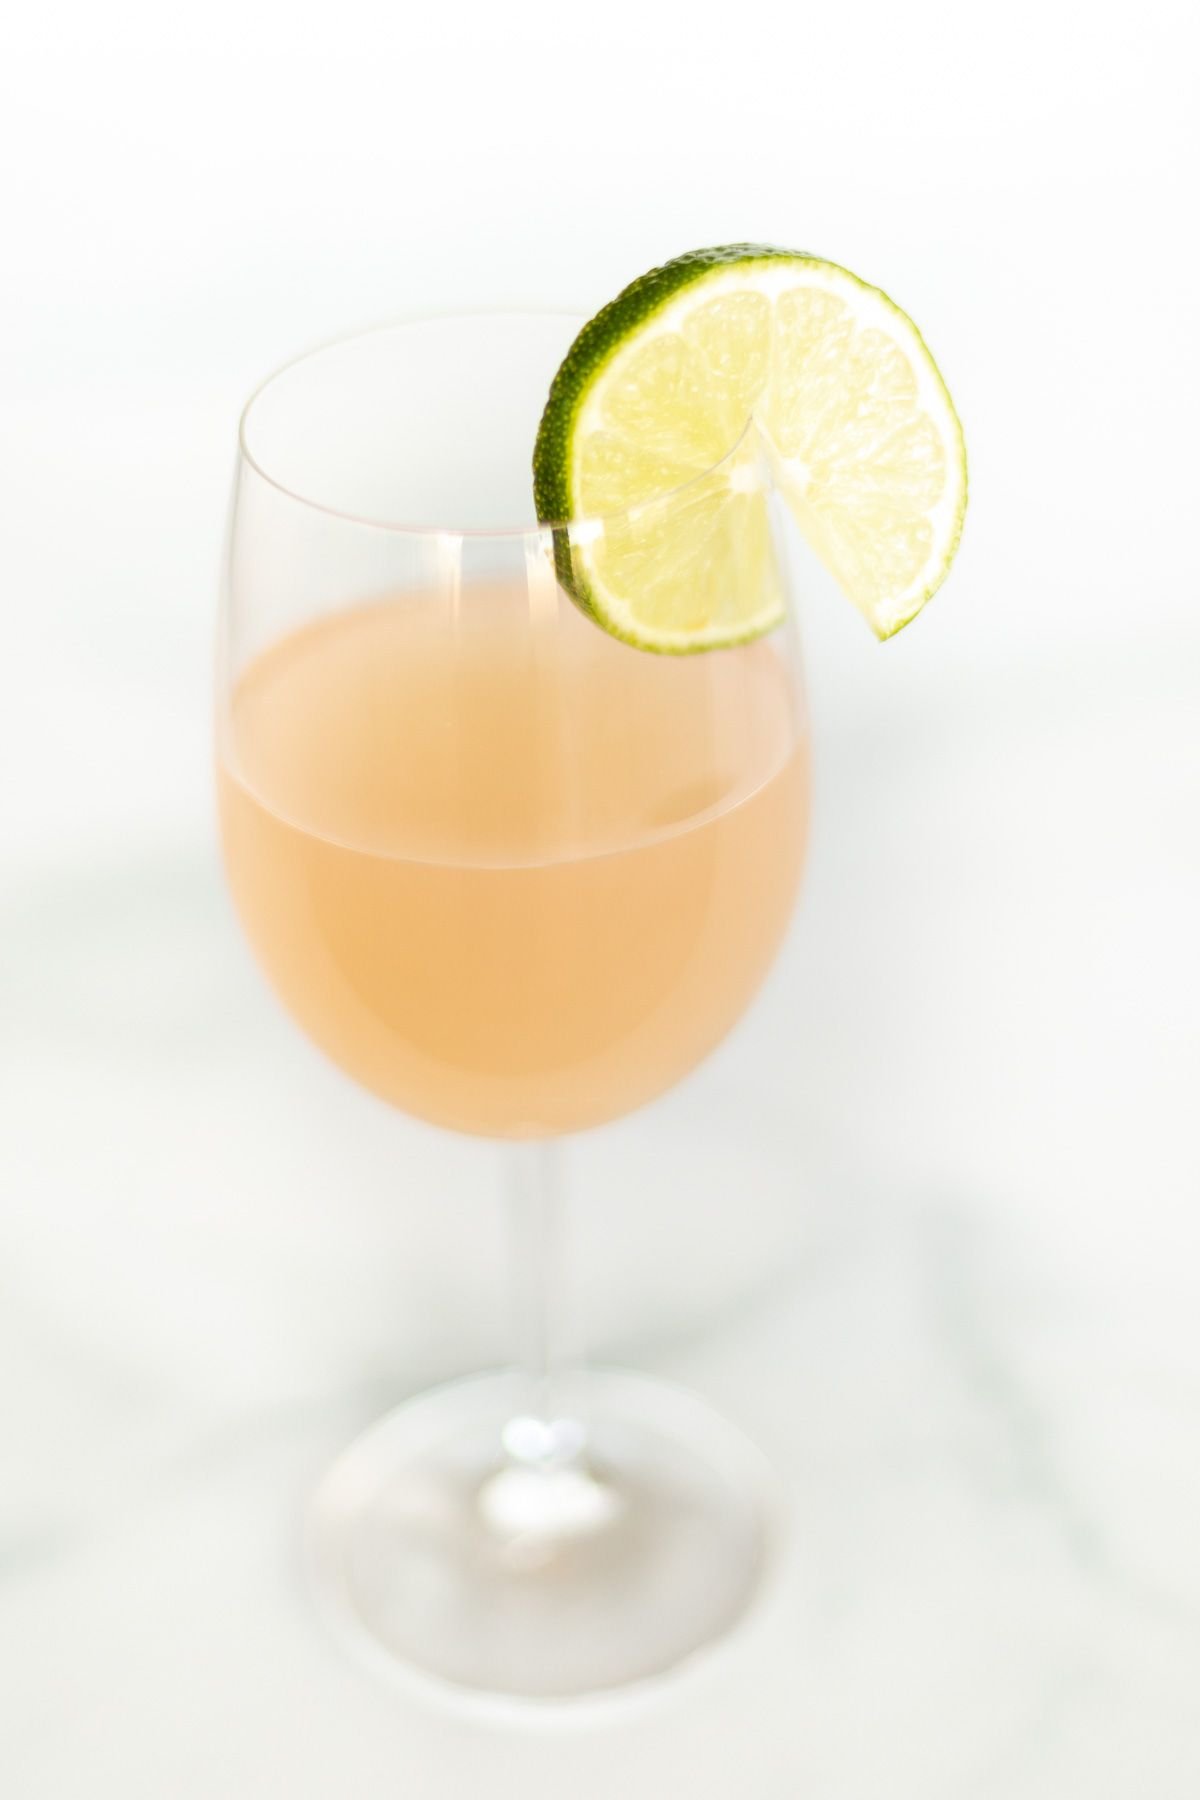 A wine margarita cocktail in a wine glass, garnished with a slice of lime